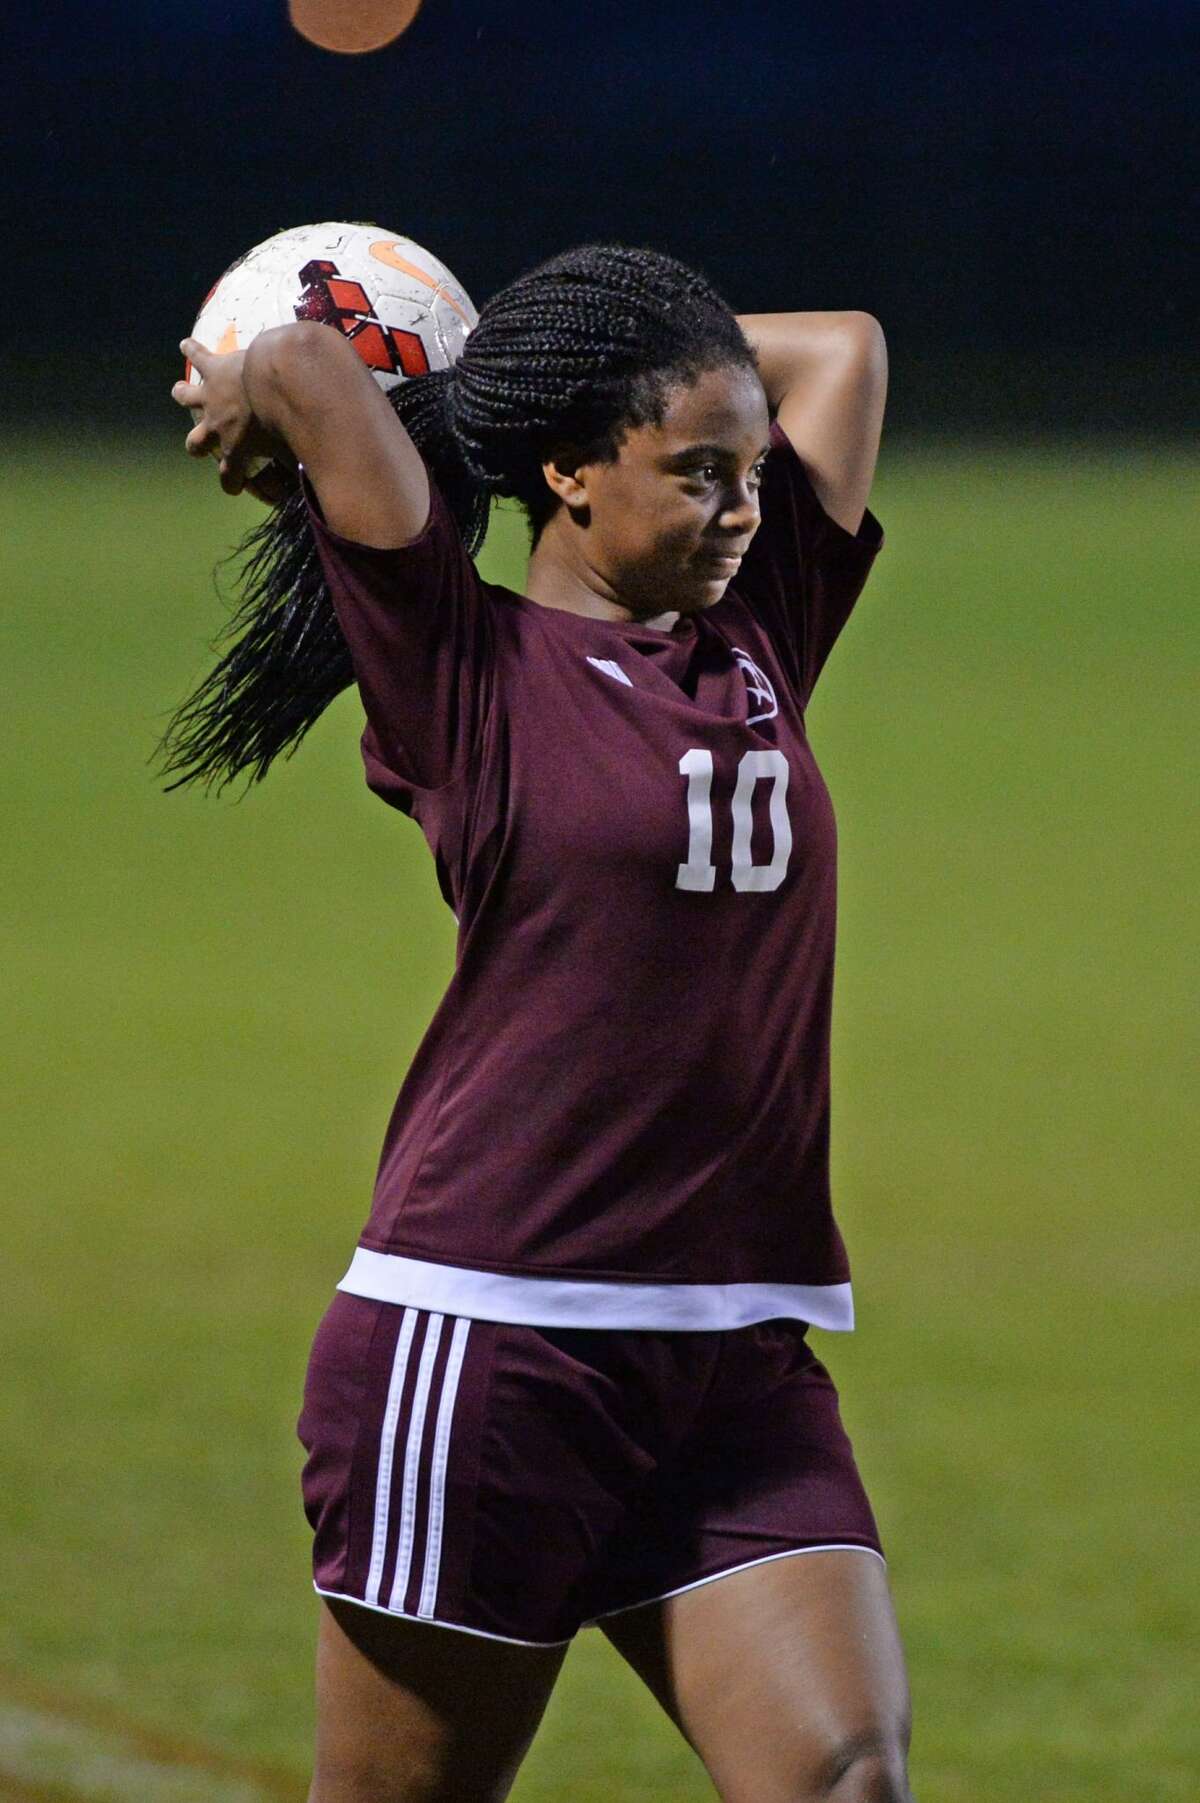 Kenedy Verge (10) of Kempner makes a throw-inj during the first half of a girls high school soccer game between the Travis Tigers and the Kempner Cougars on Friday, March 10, 2017 at Travis High School, Richmond, TX.